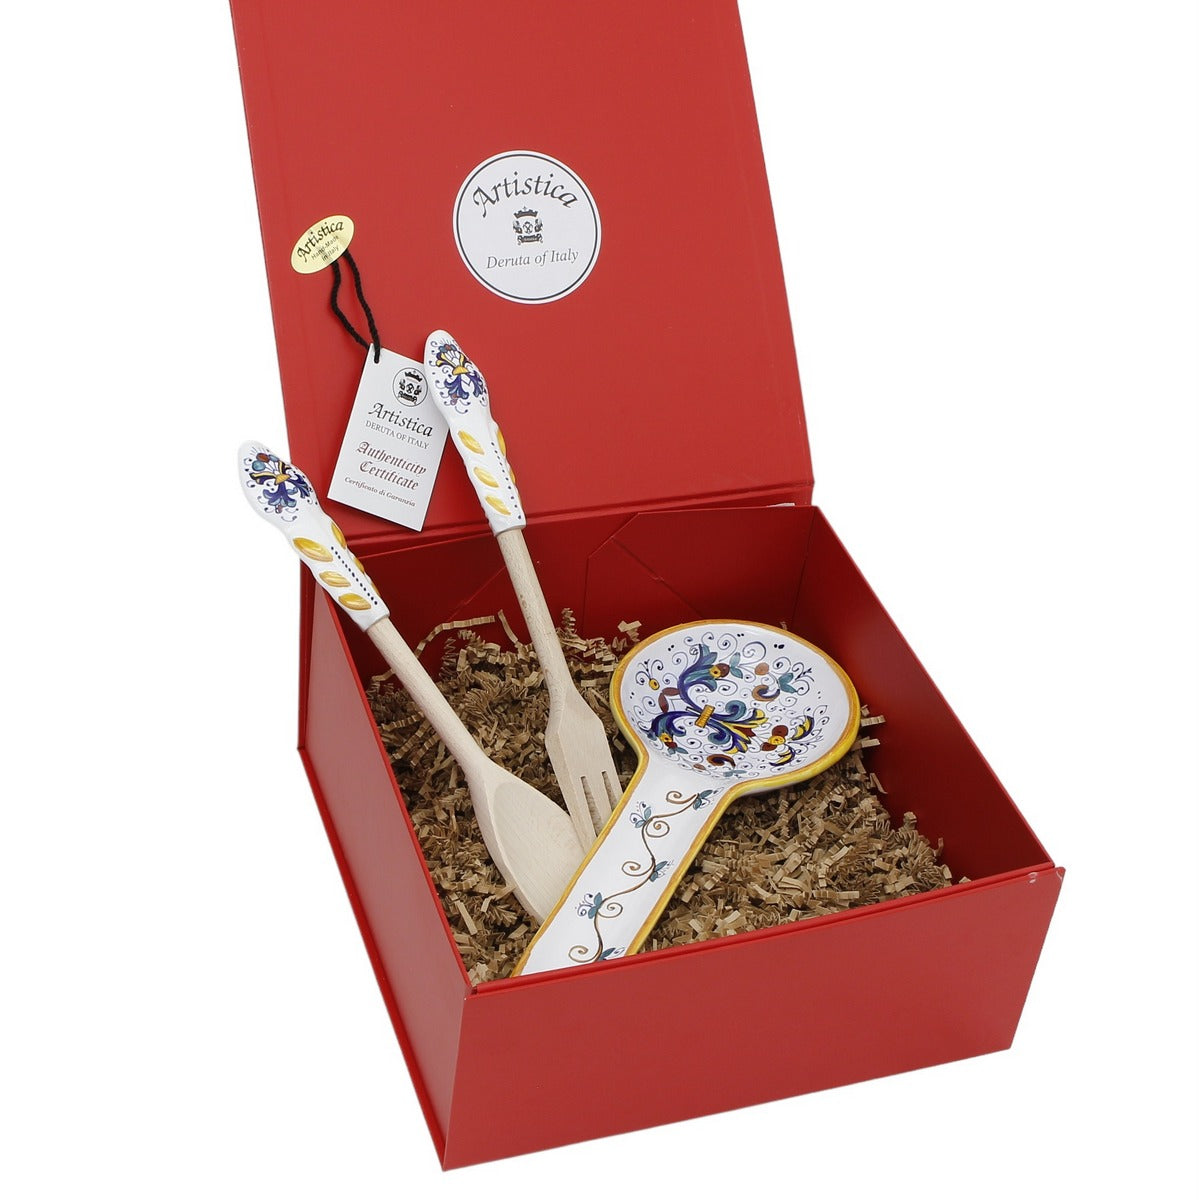 GIFT BOX: DeLuxe Glossy Red Gift Box with Spoon rest + Pair of Utensils in Ricco Deruta Design (Set as shown)